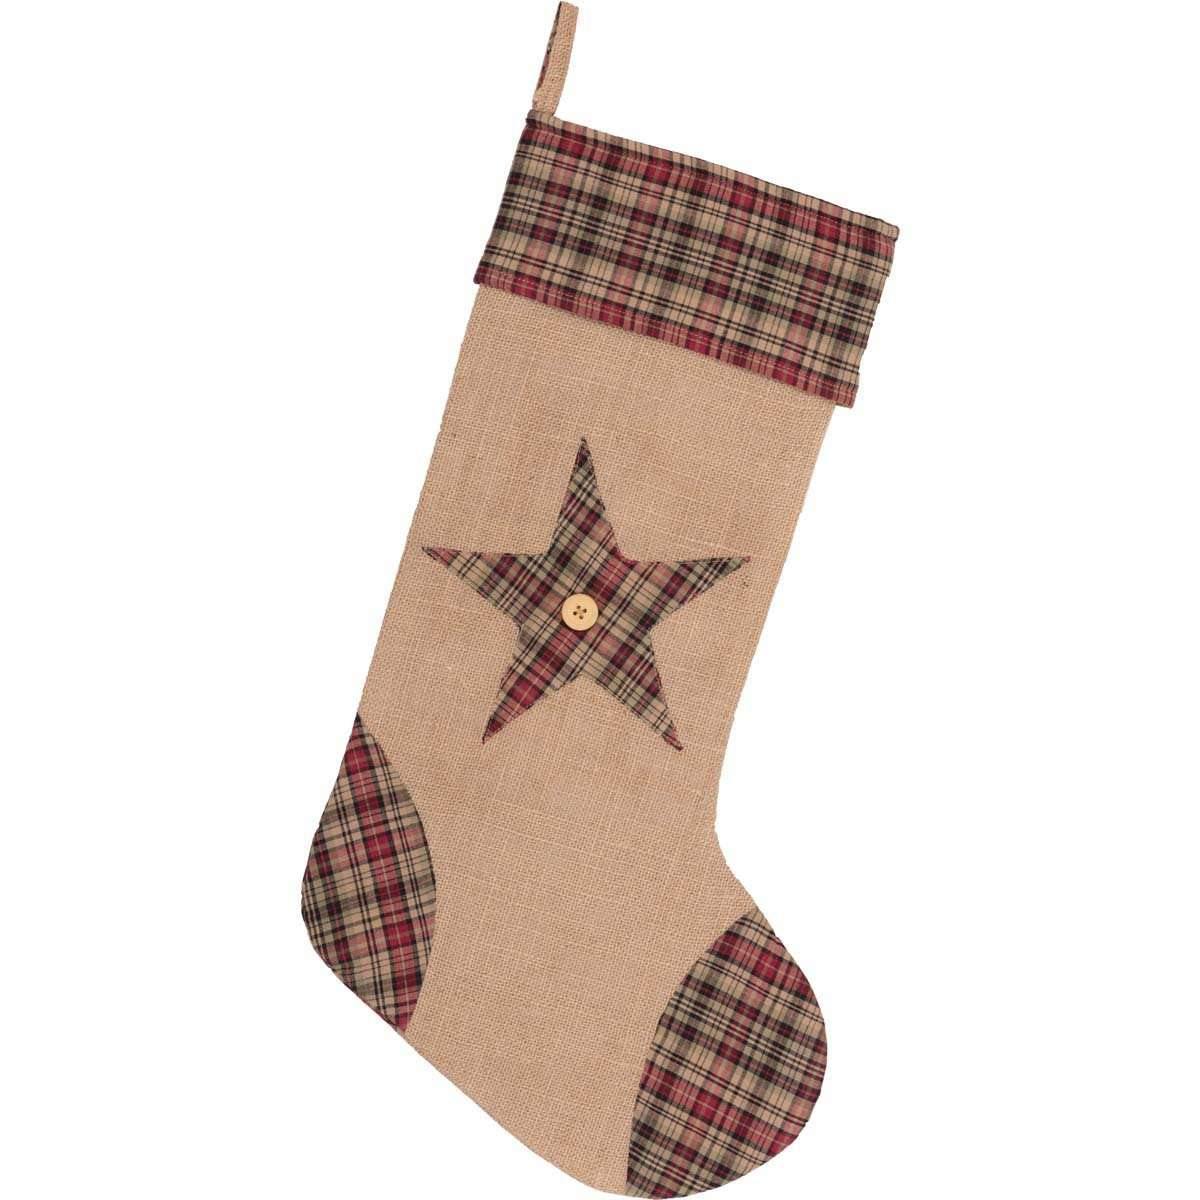 Clement Star Stocking 12x20 VHC Brands - The Fox Decor